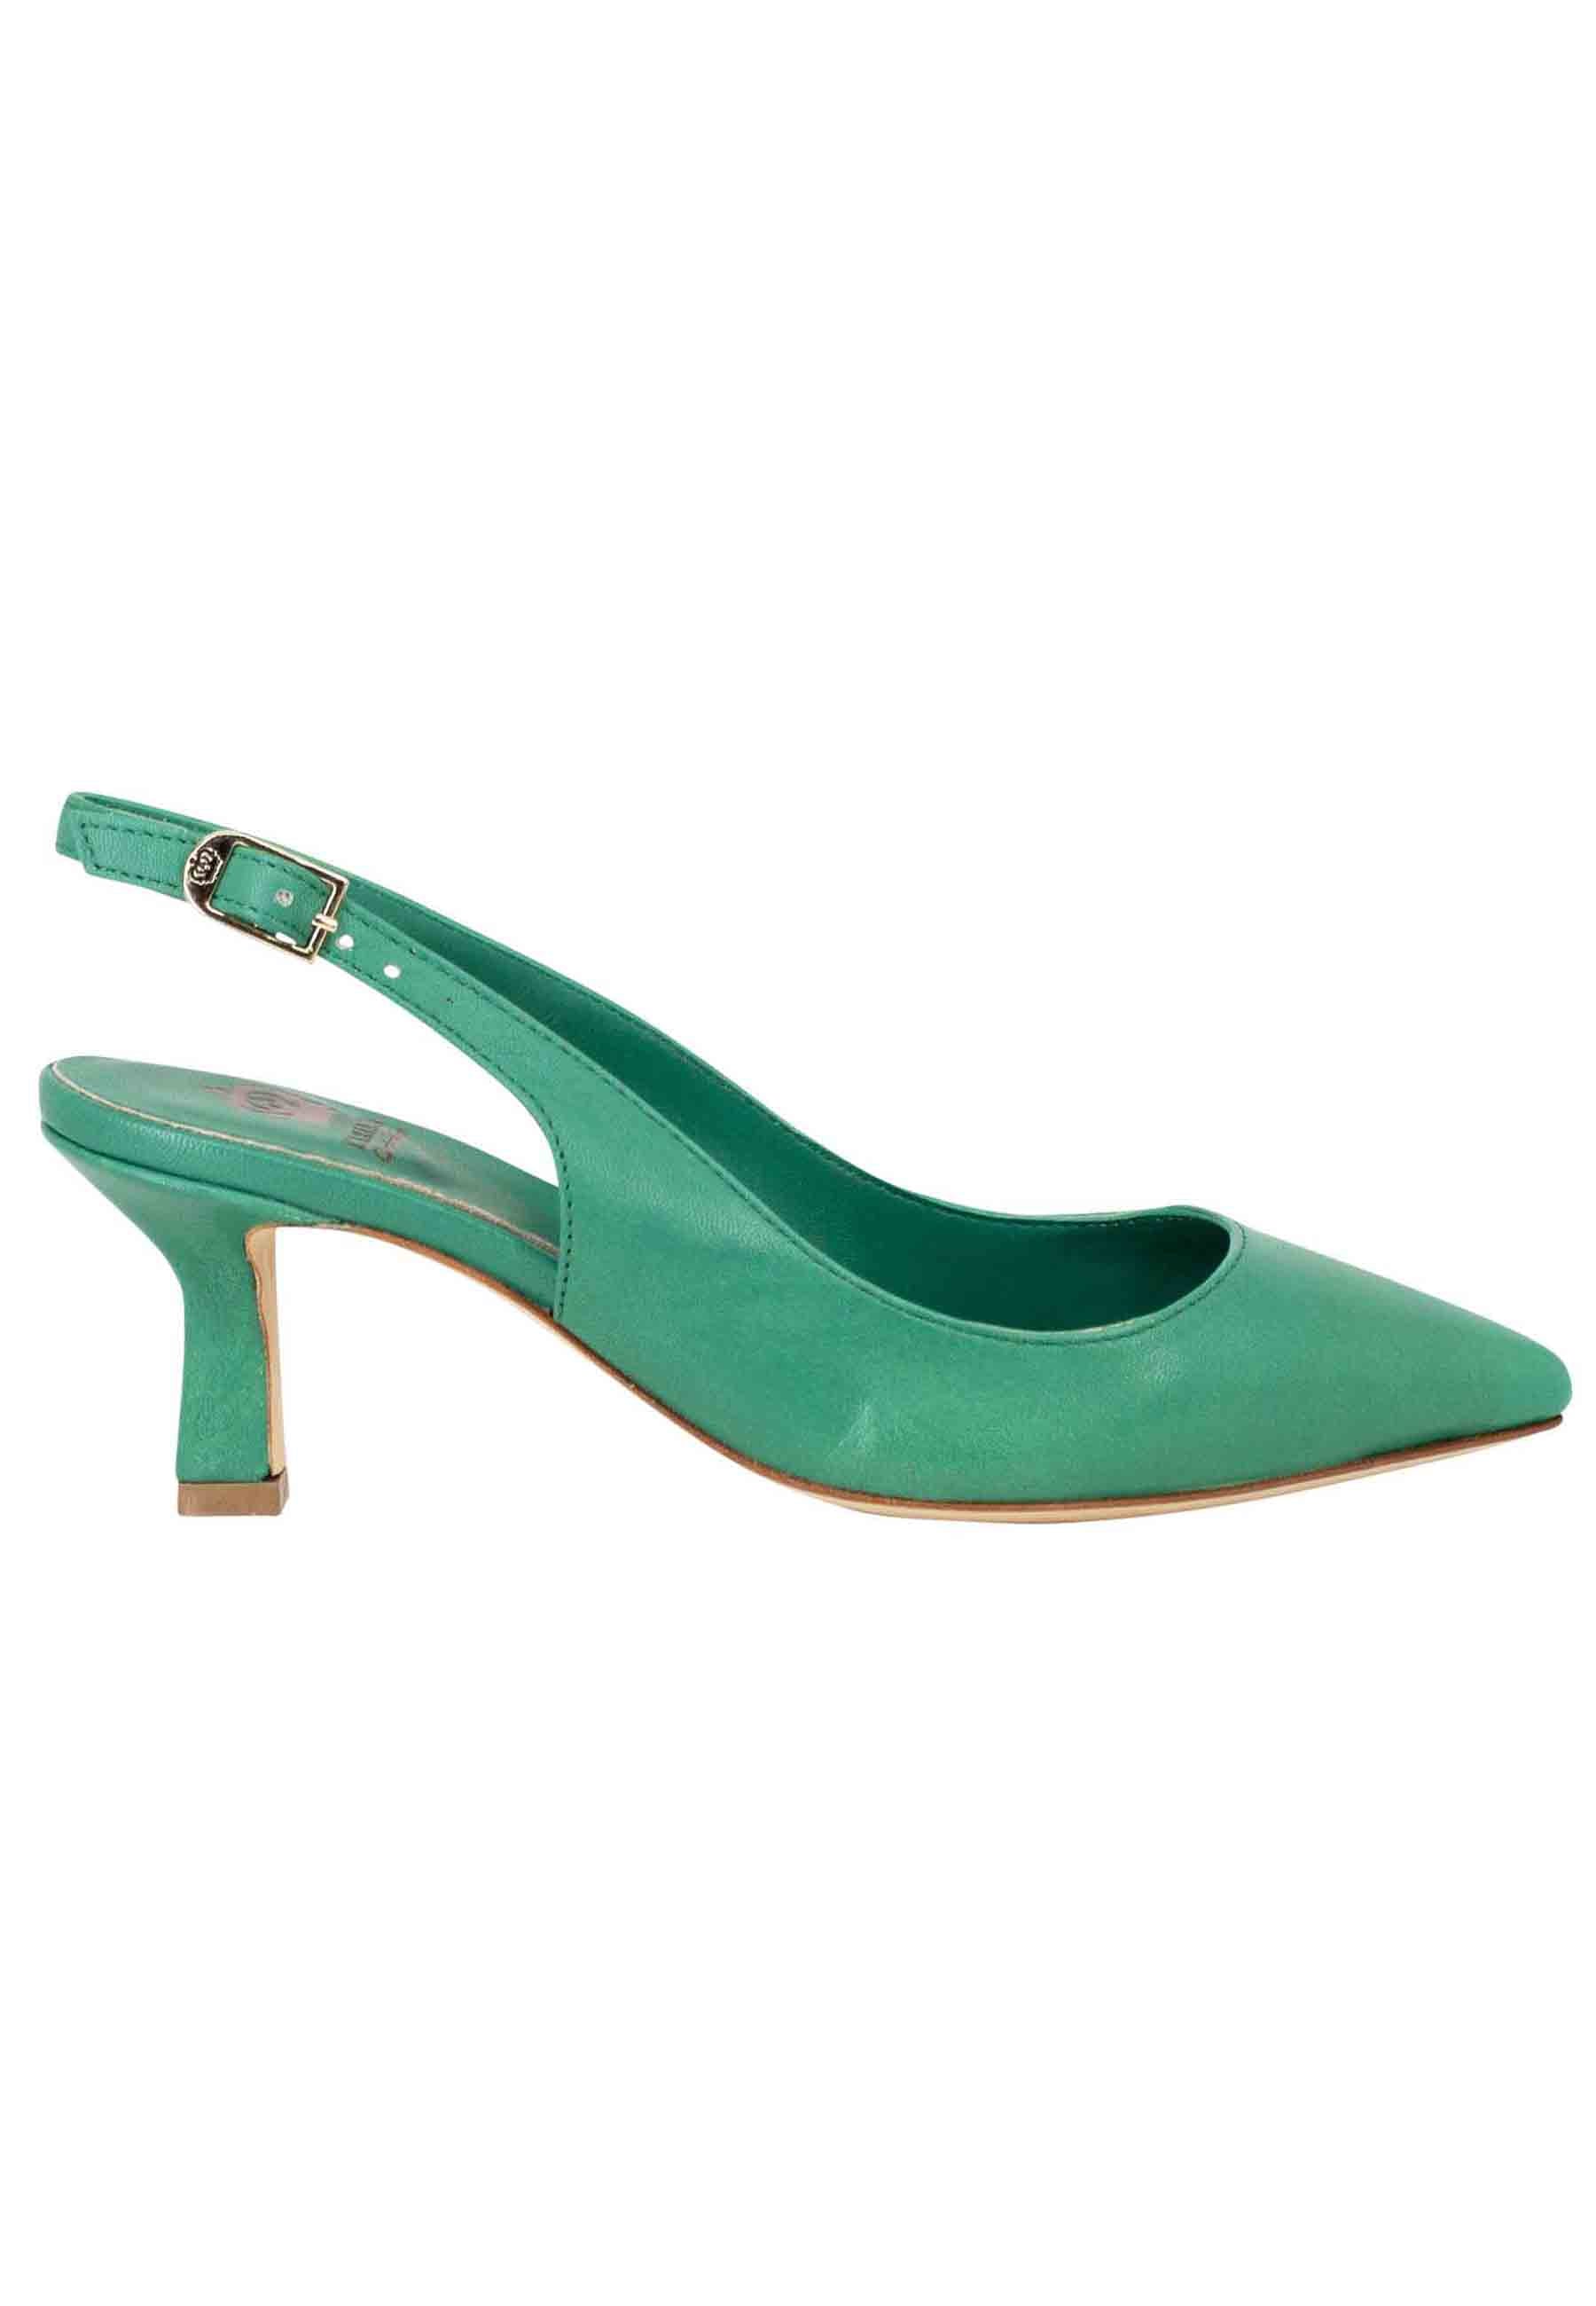 Women's slingback pumps in green leather with leather sole